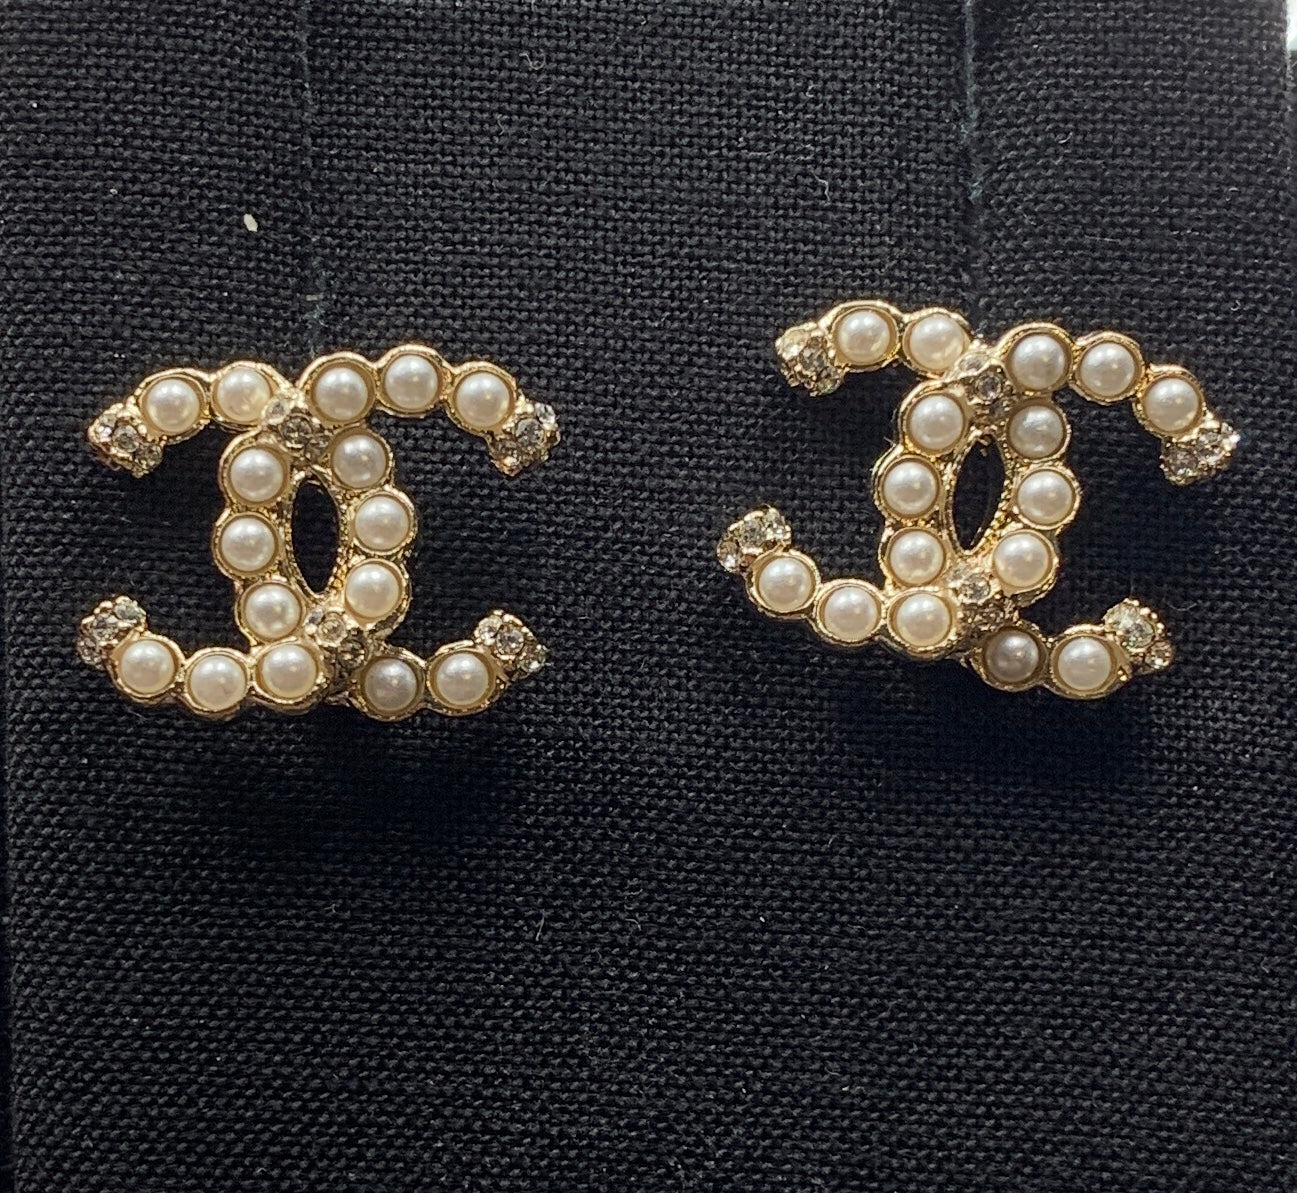 Get the best deals on CHANEL Gold Pearl Fashion Earrings when you shop the  largest online selection at . Free shipping on many items, Browse  your favorite brands